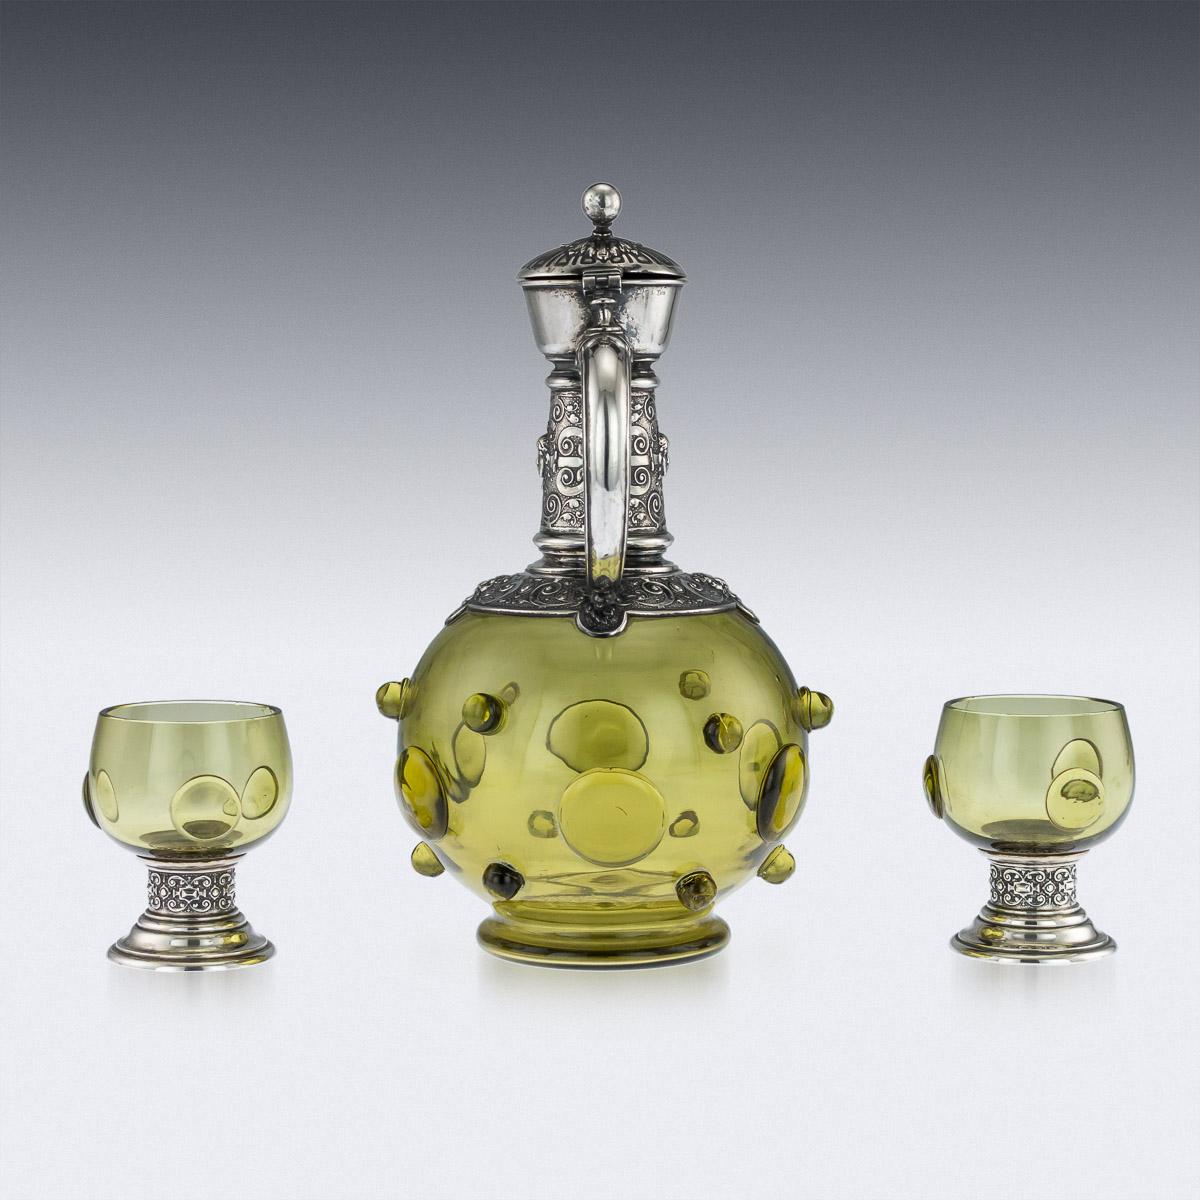 Antique late 19th century German solid silver and green glass decorative wine claret jug and pair of goblets, bulbous green glass body applied with unusual ball decoration, the silver mount is chased with Cellini inspired classical motifs, C-shaped